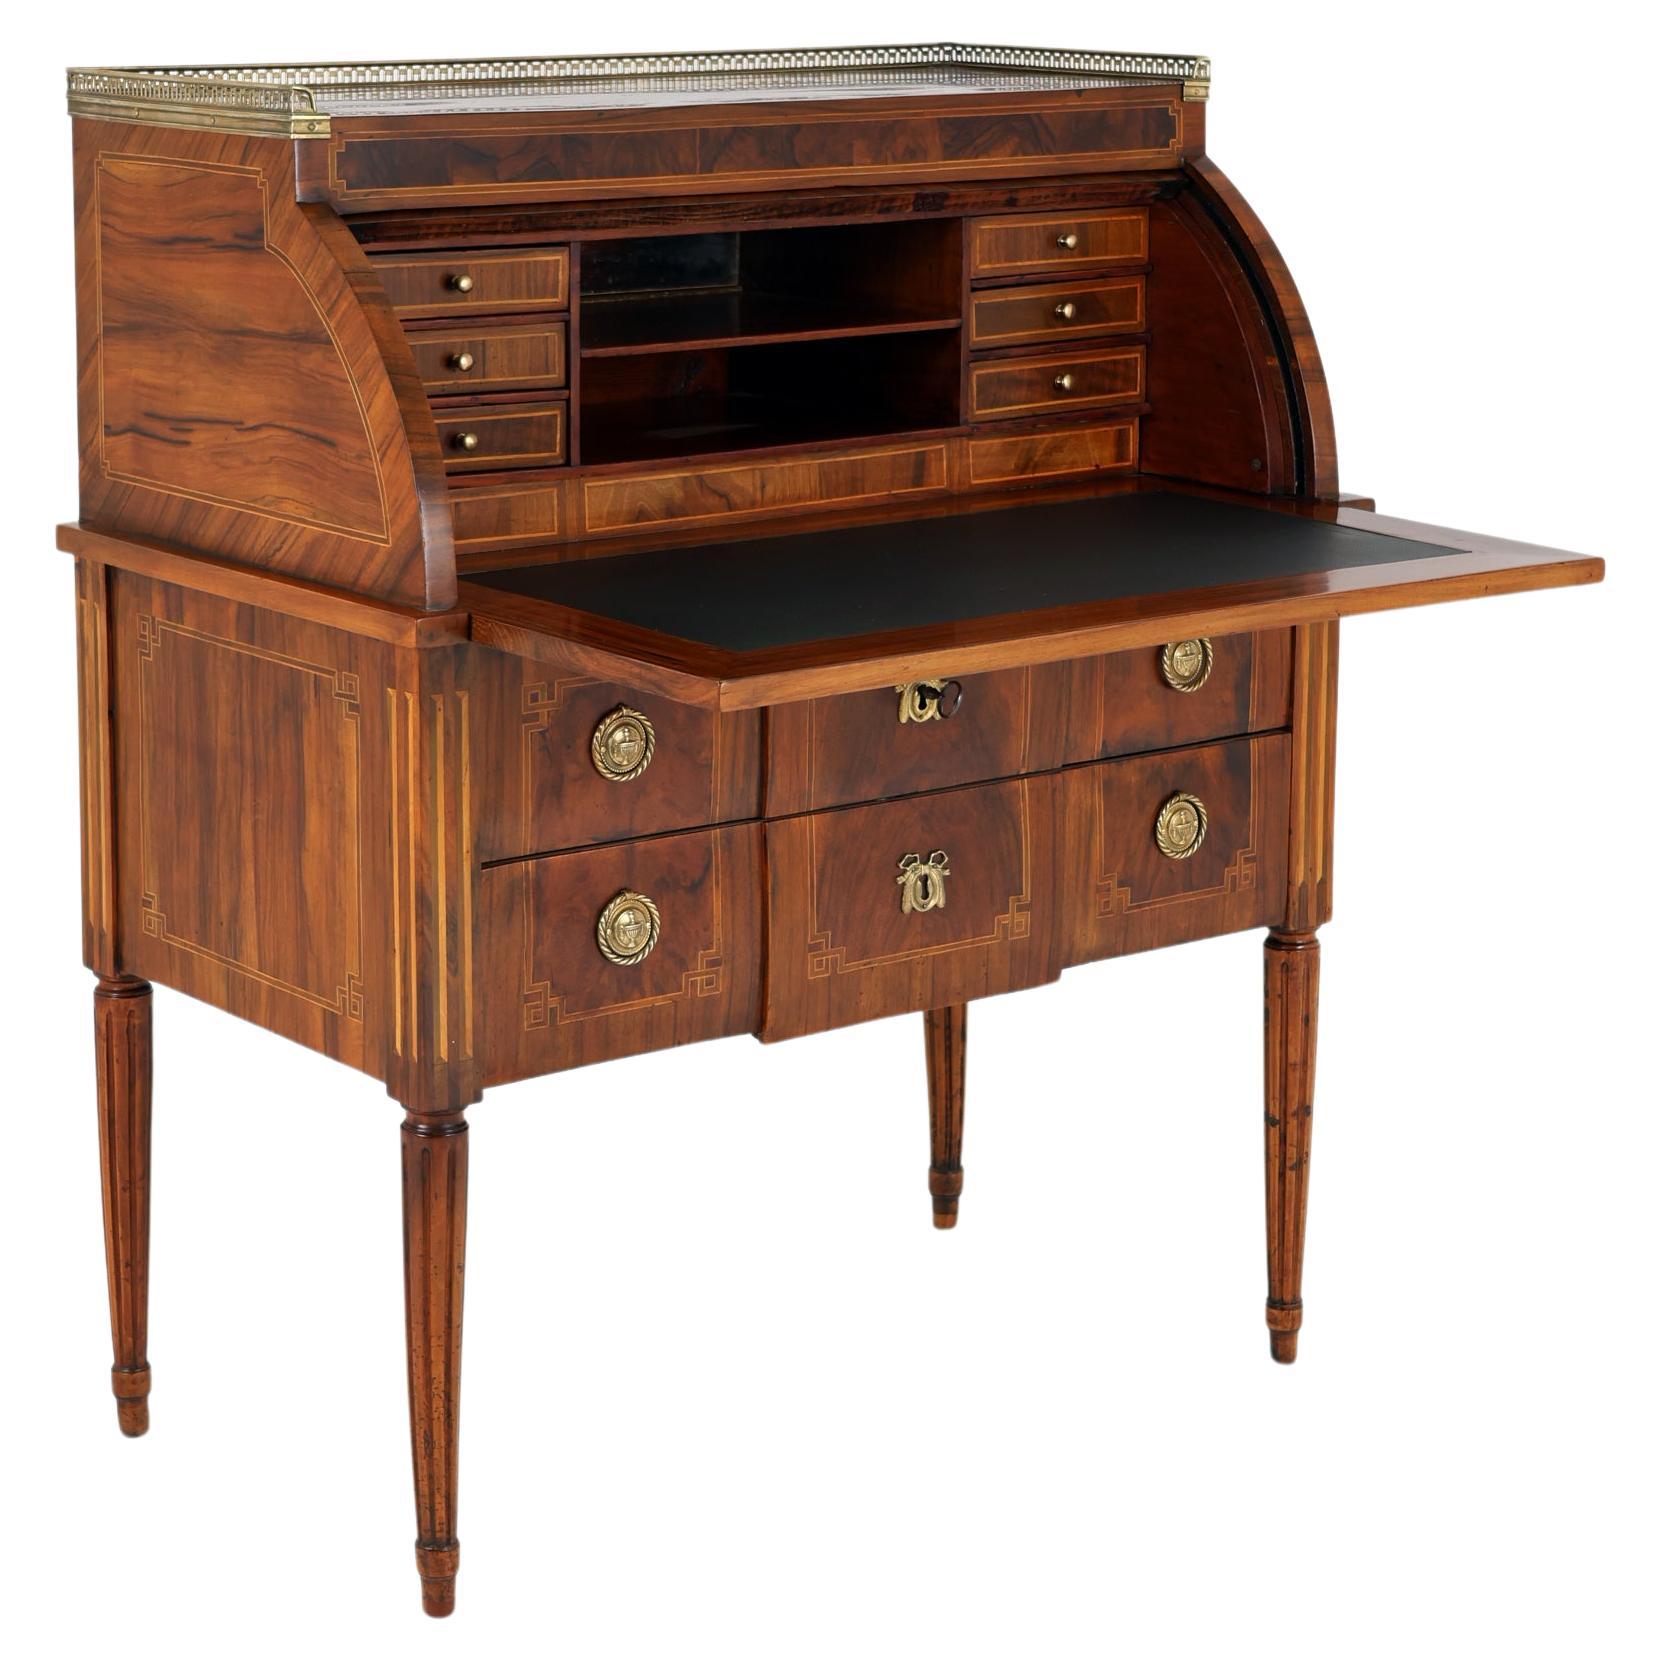 Late 18th Century Louis XVI Cylinder Desk with central lock and beautiful patina